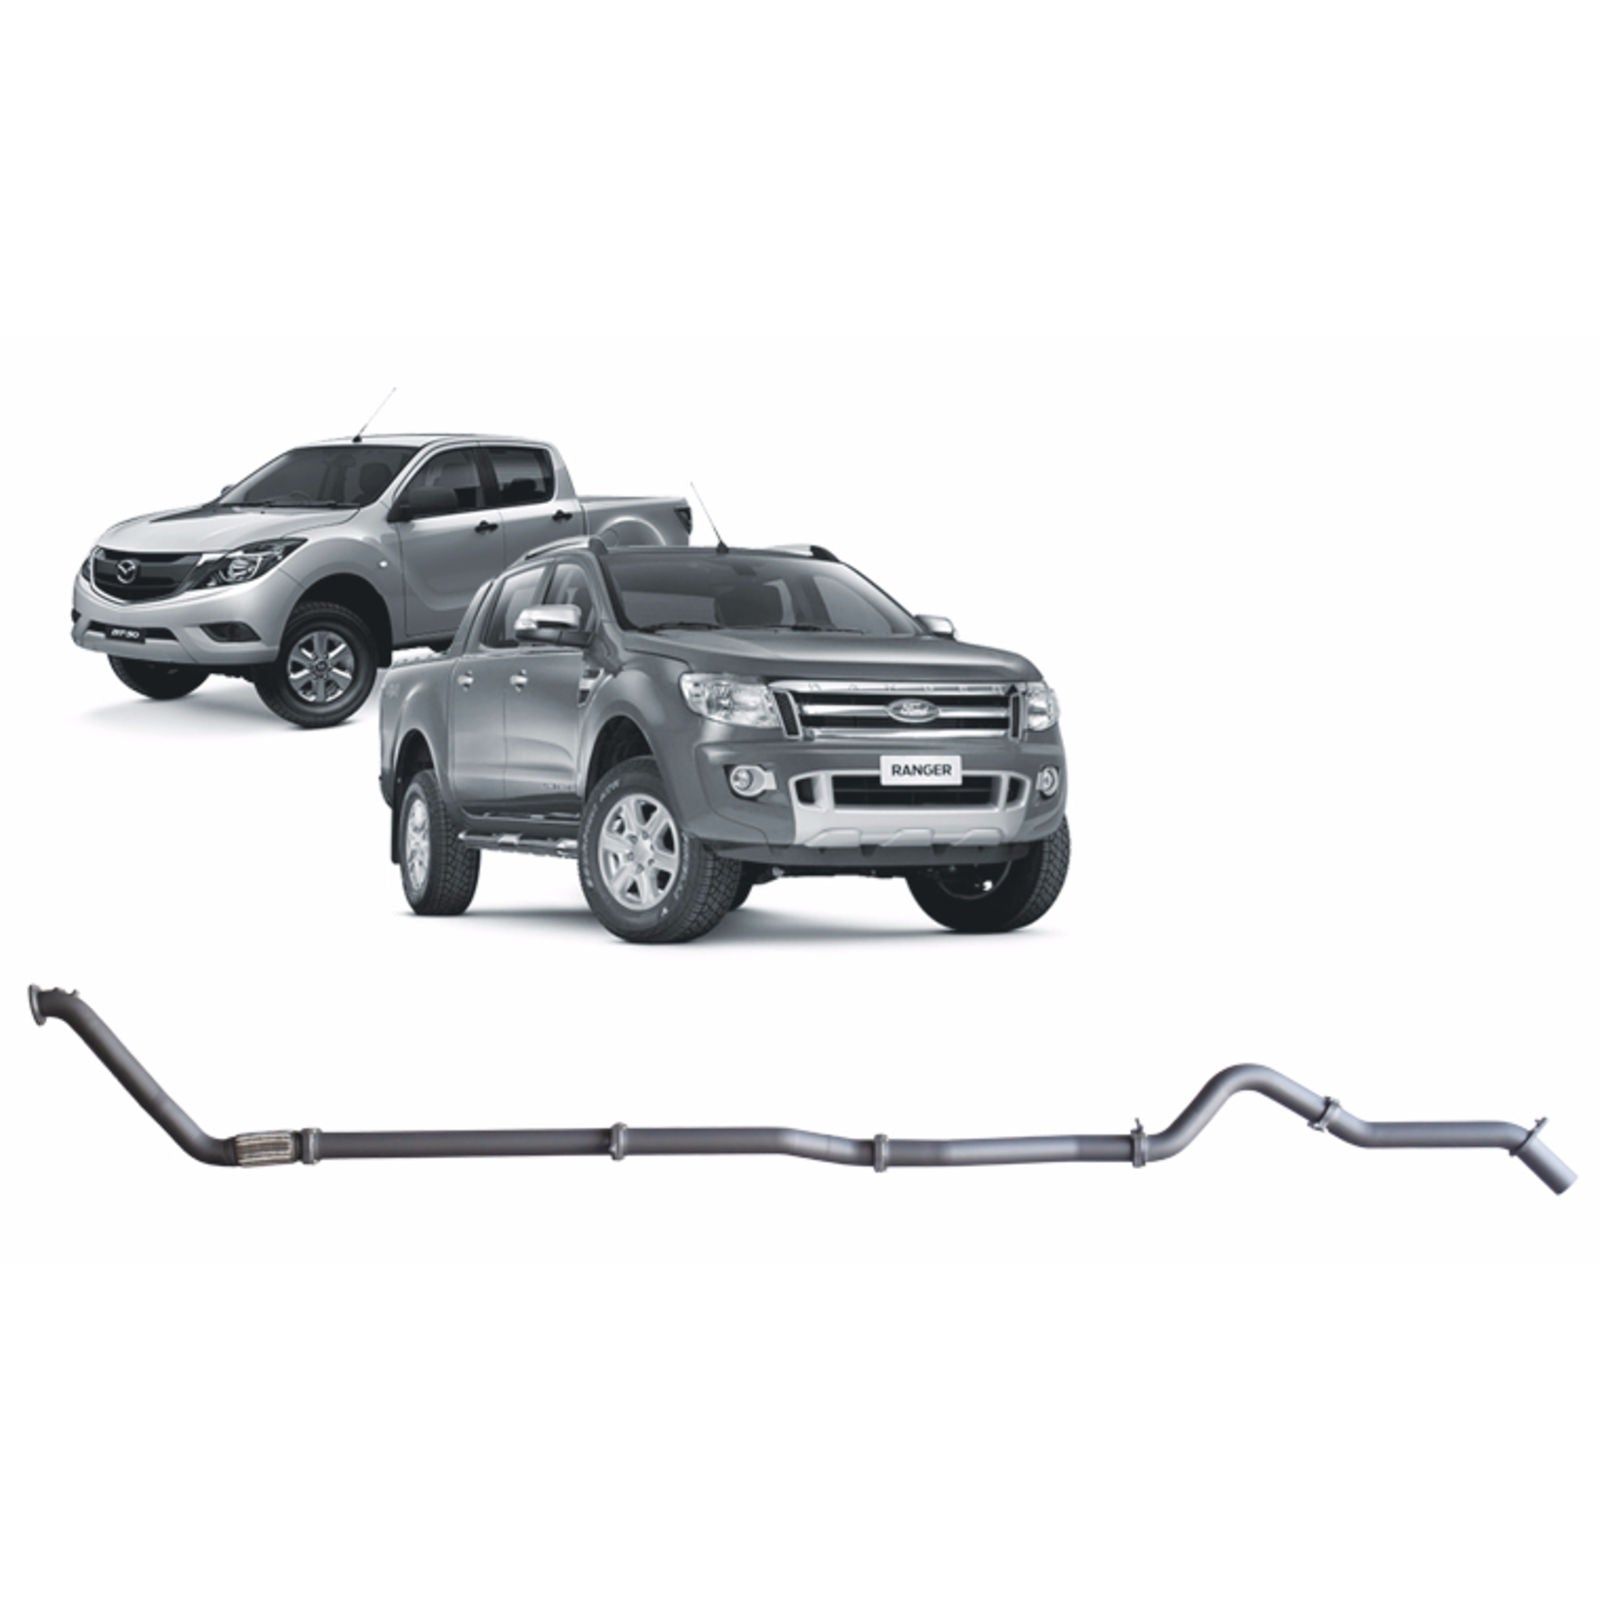 Redback Performance - Ford Ranger (01/2011 - 09/2016), Mazda BT-50 (11/2011 - 06/2016) Exhaust (Extreme Duty 4x4) "Pipe Only"